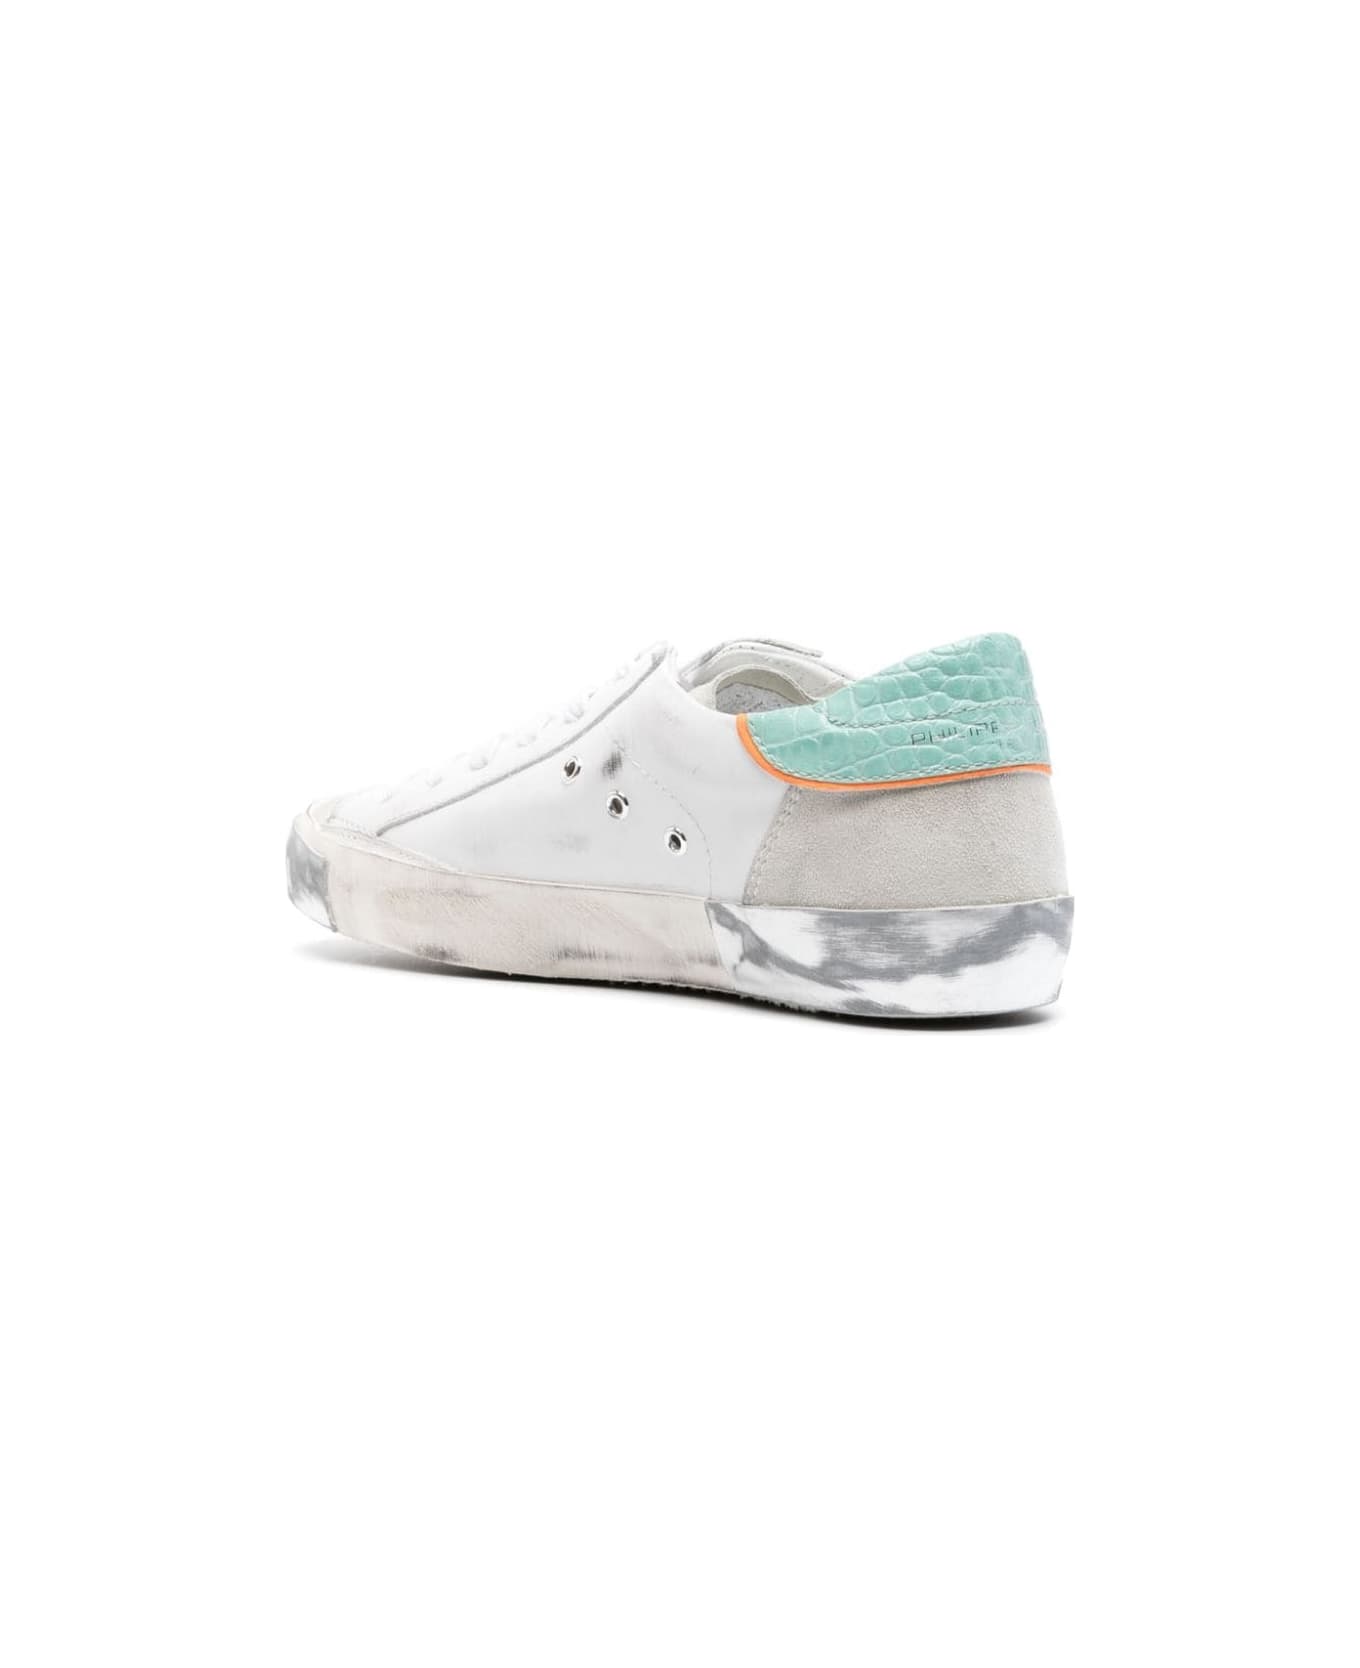 Philippe Model Prsx Low Sneakers - White And Aquamarine - White